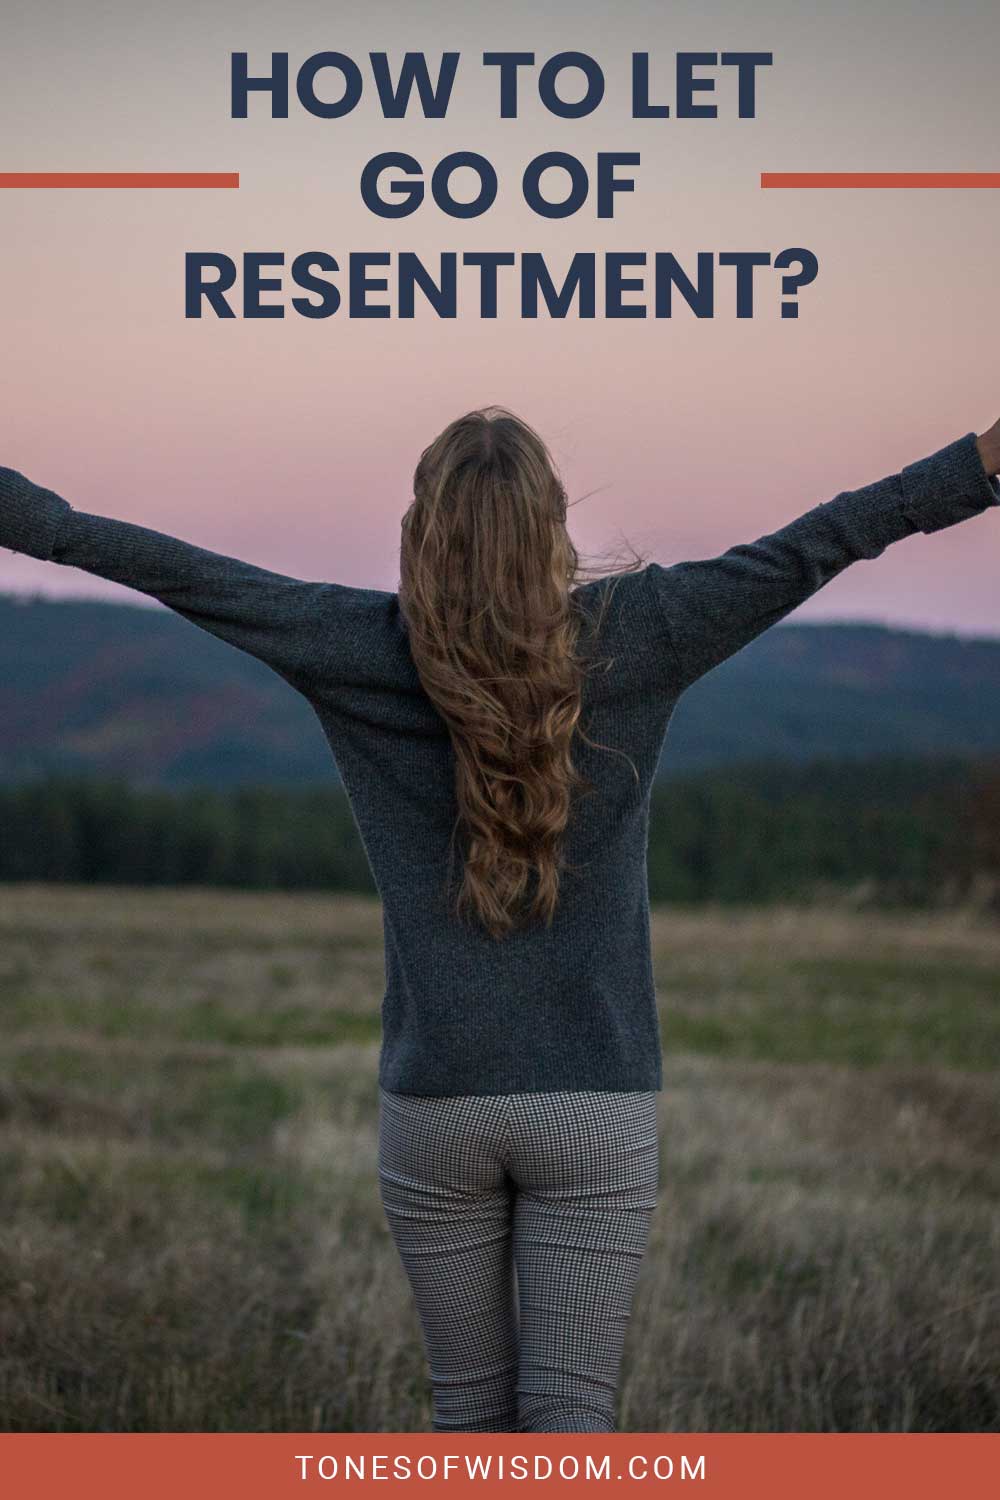 How To Let Go Of Resentment?